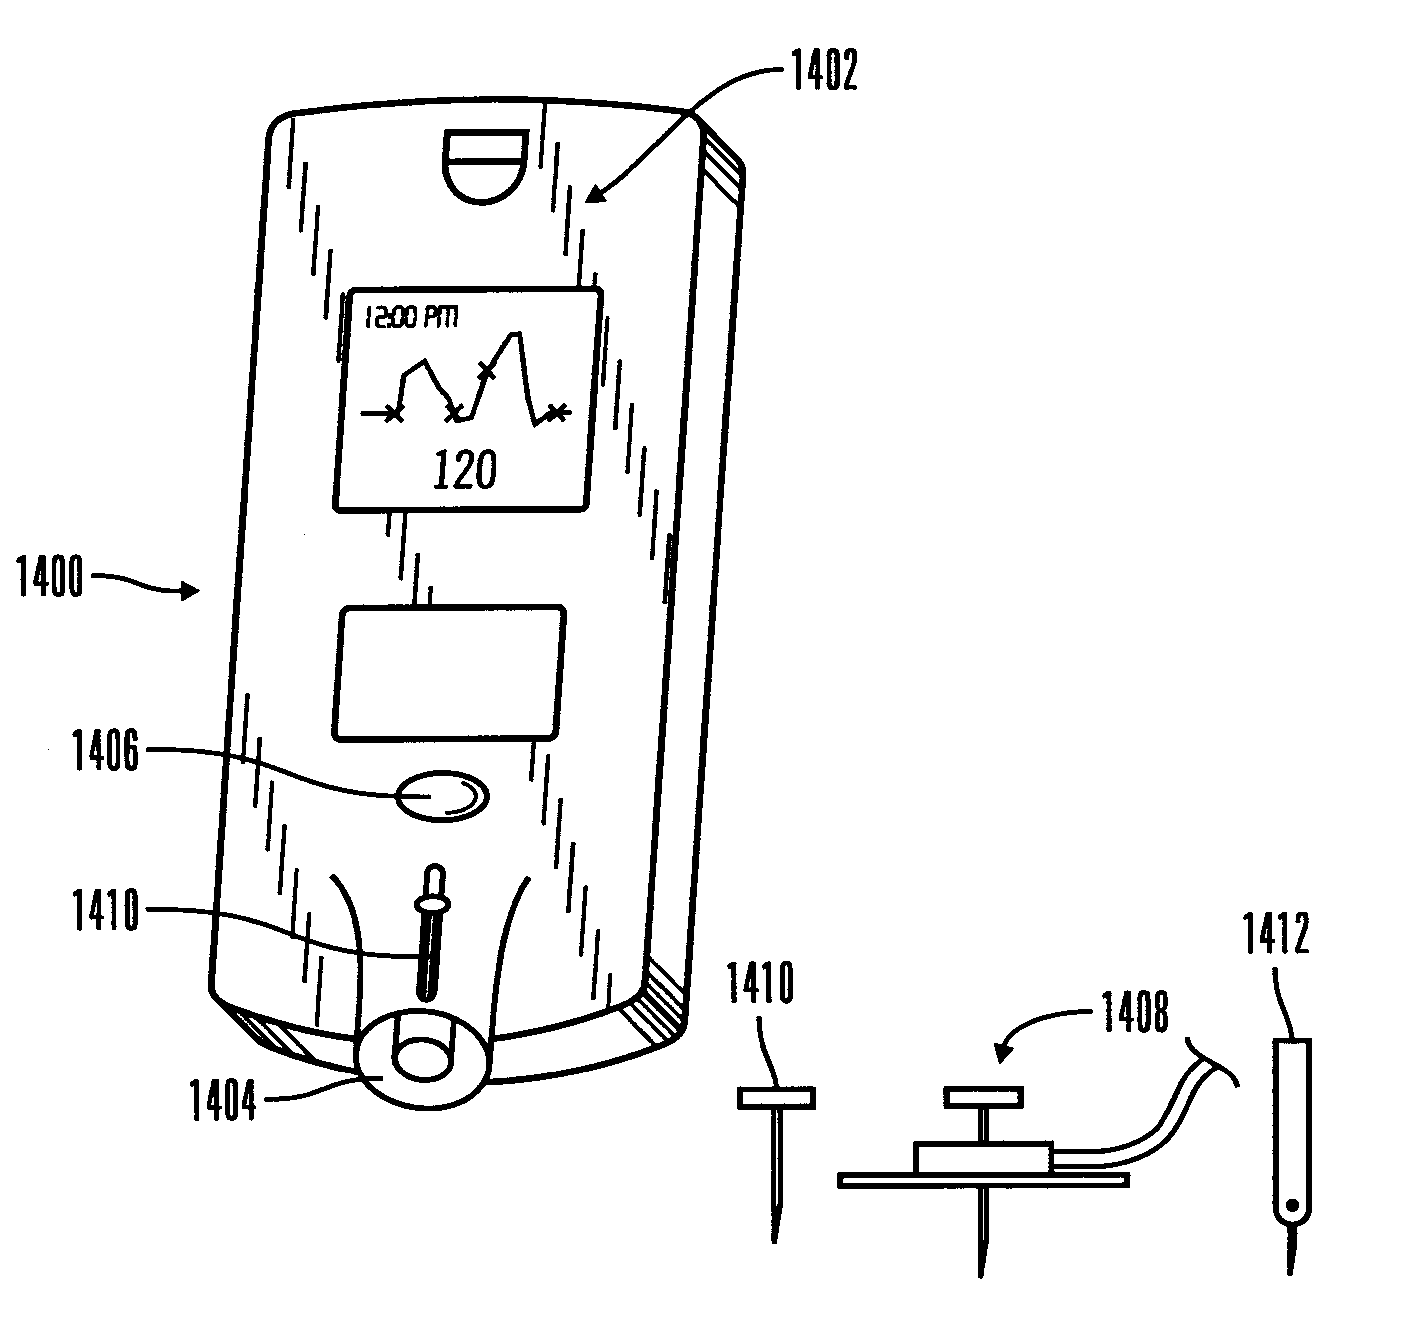 Insertion device for an insertion set and method of using the same